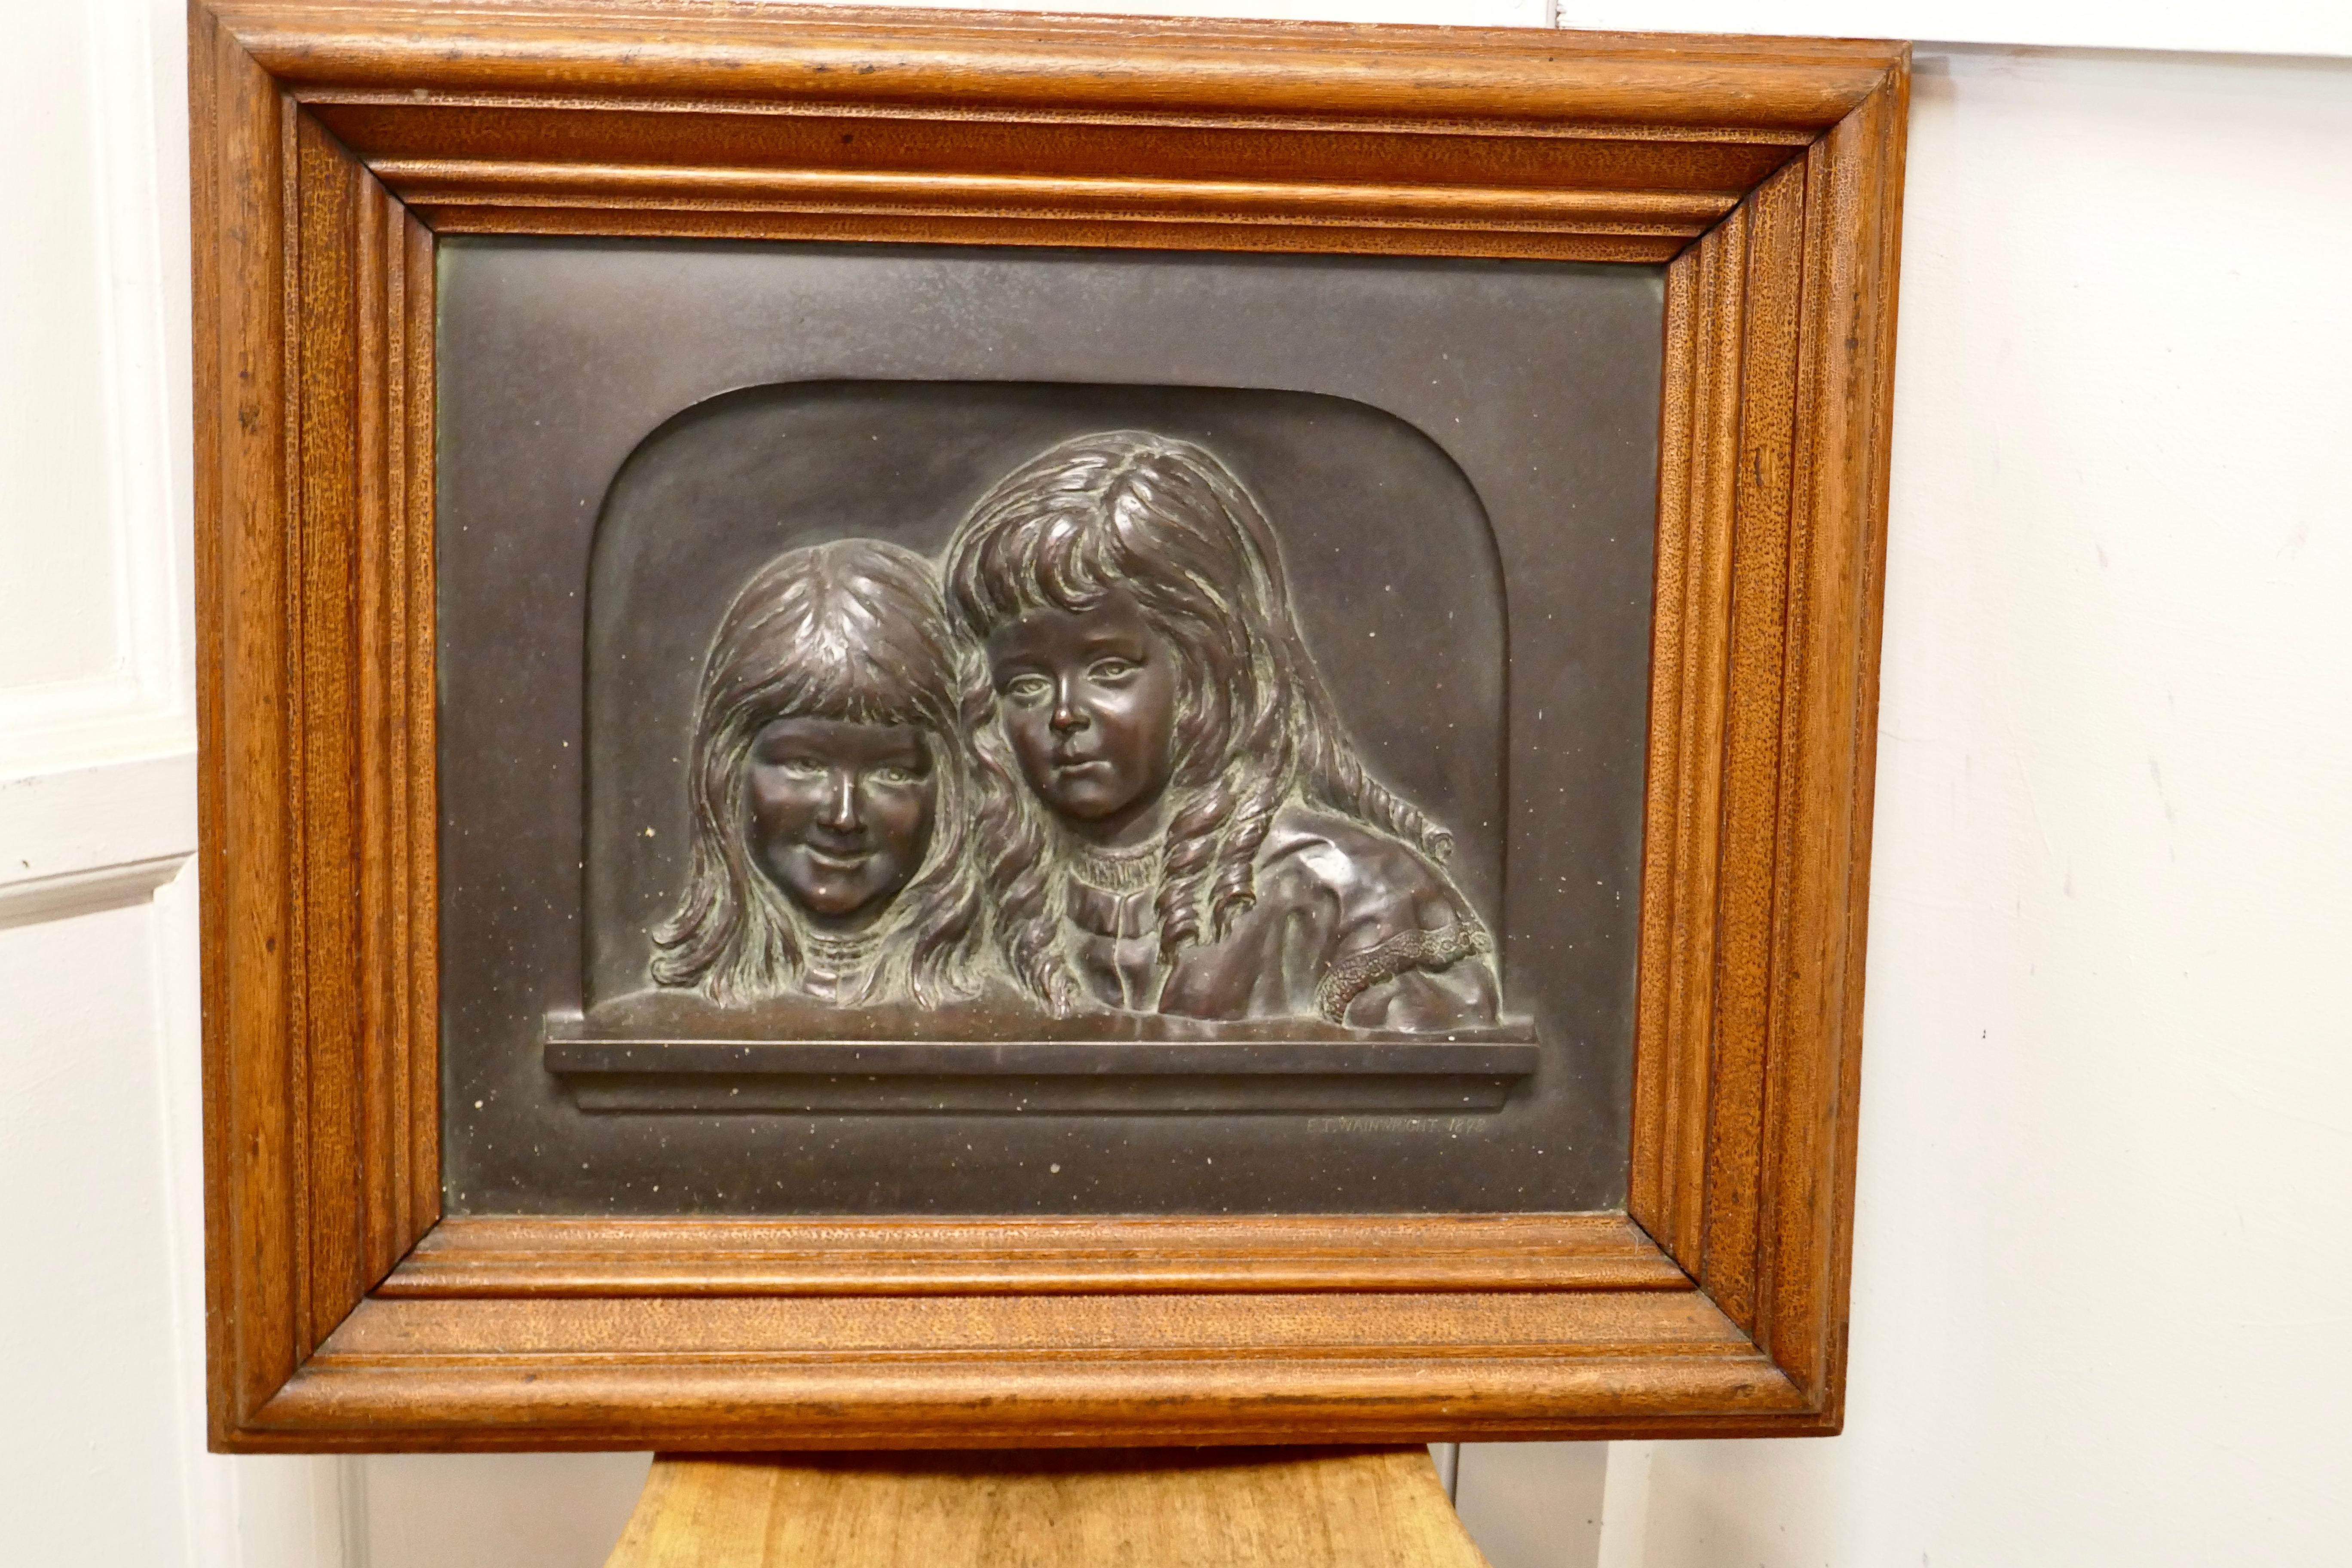 Heavy bronze relief wall plaque, “Sisters” by E T Wainwright 1898

An exceptional bronze plaque, set in its original 4” wide purpose made Oak Frame with iron hanging brackets 
The subjects are 2 smiling girls, a lovely piece in good condition